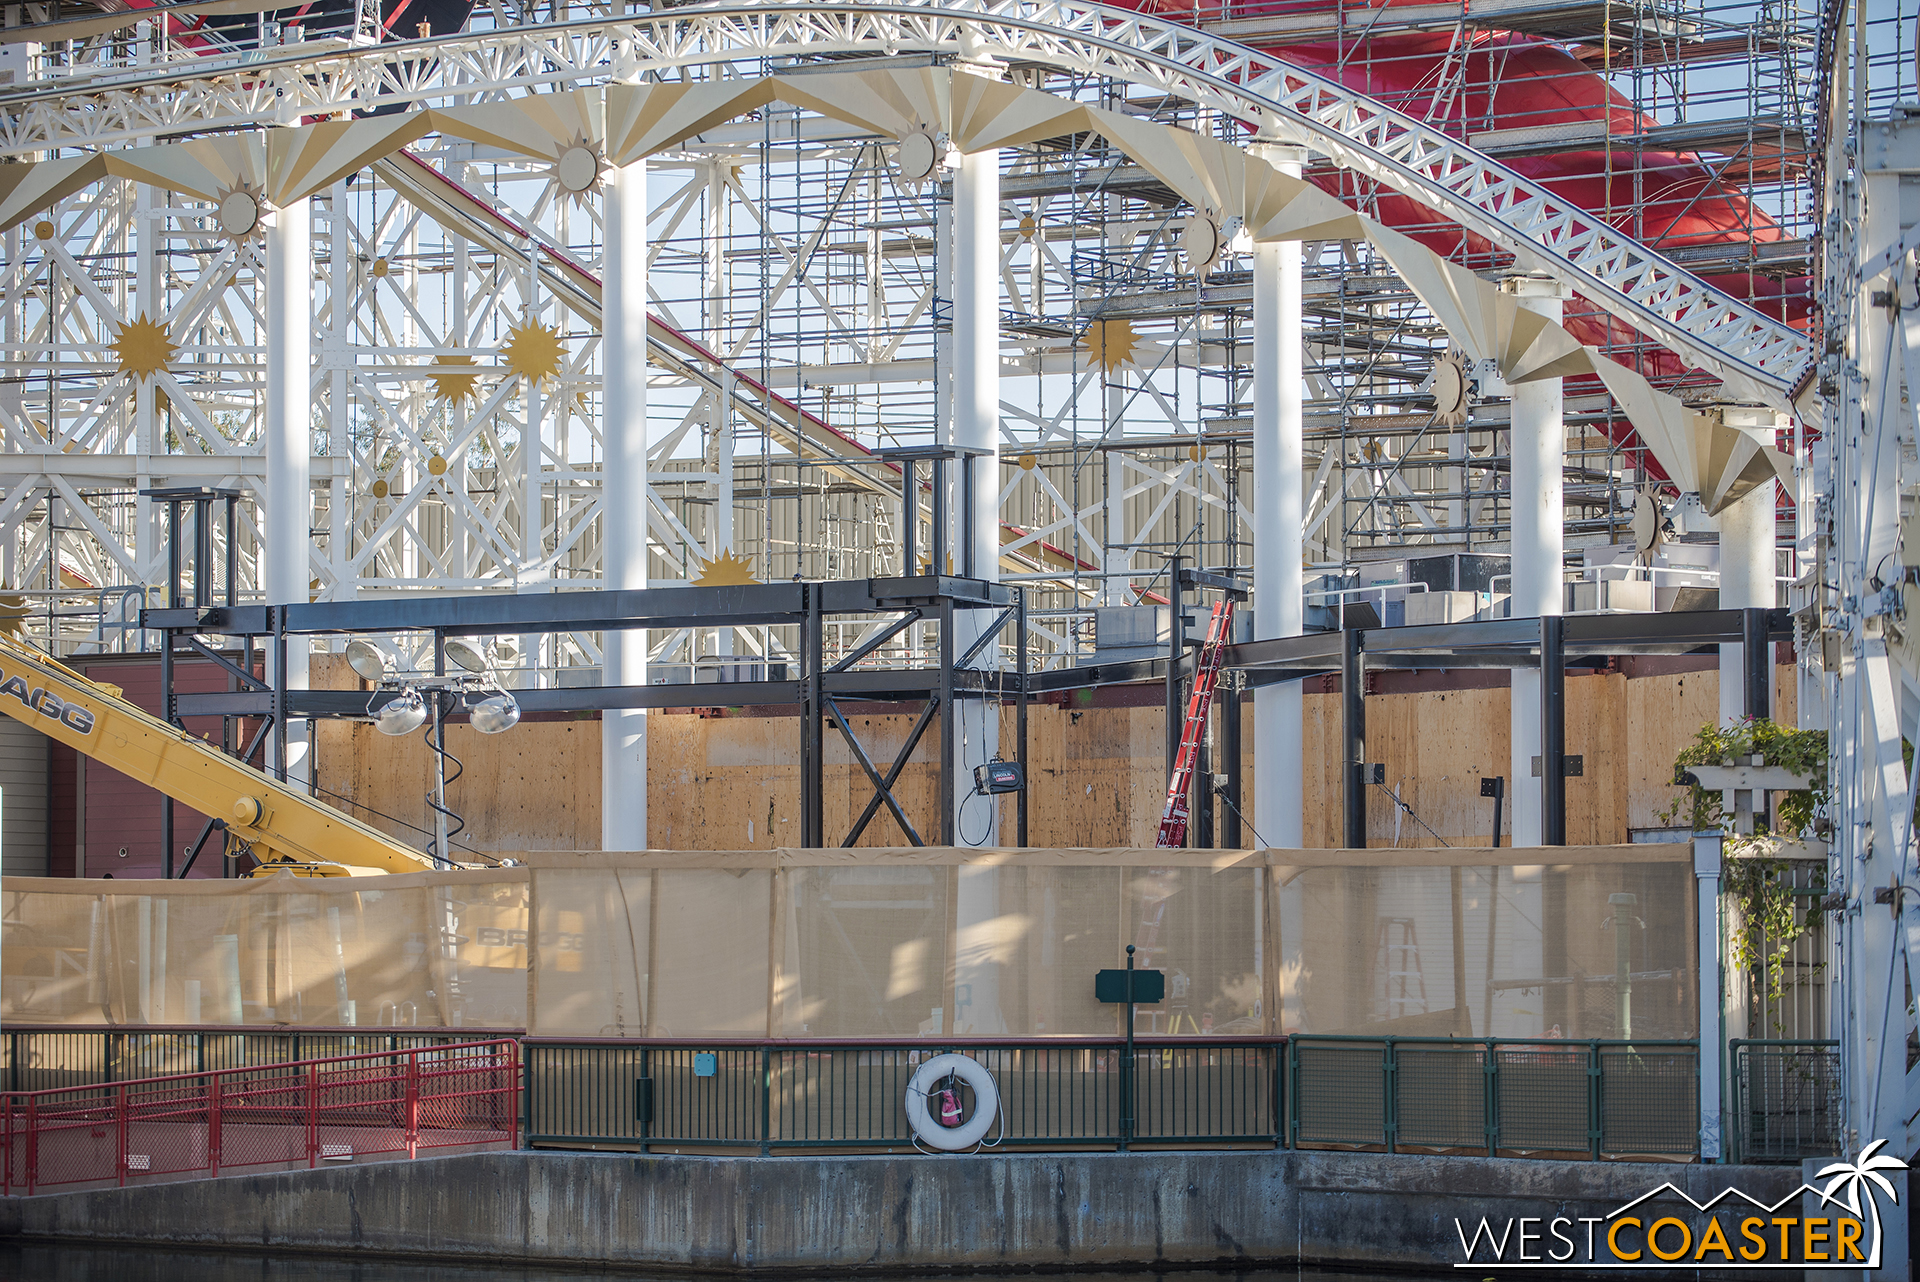  They’re adding new steel structure as part of the facade enhancements. 